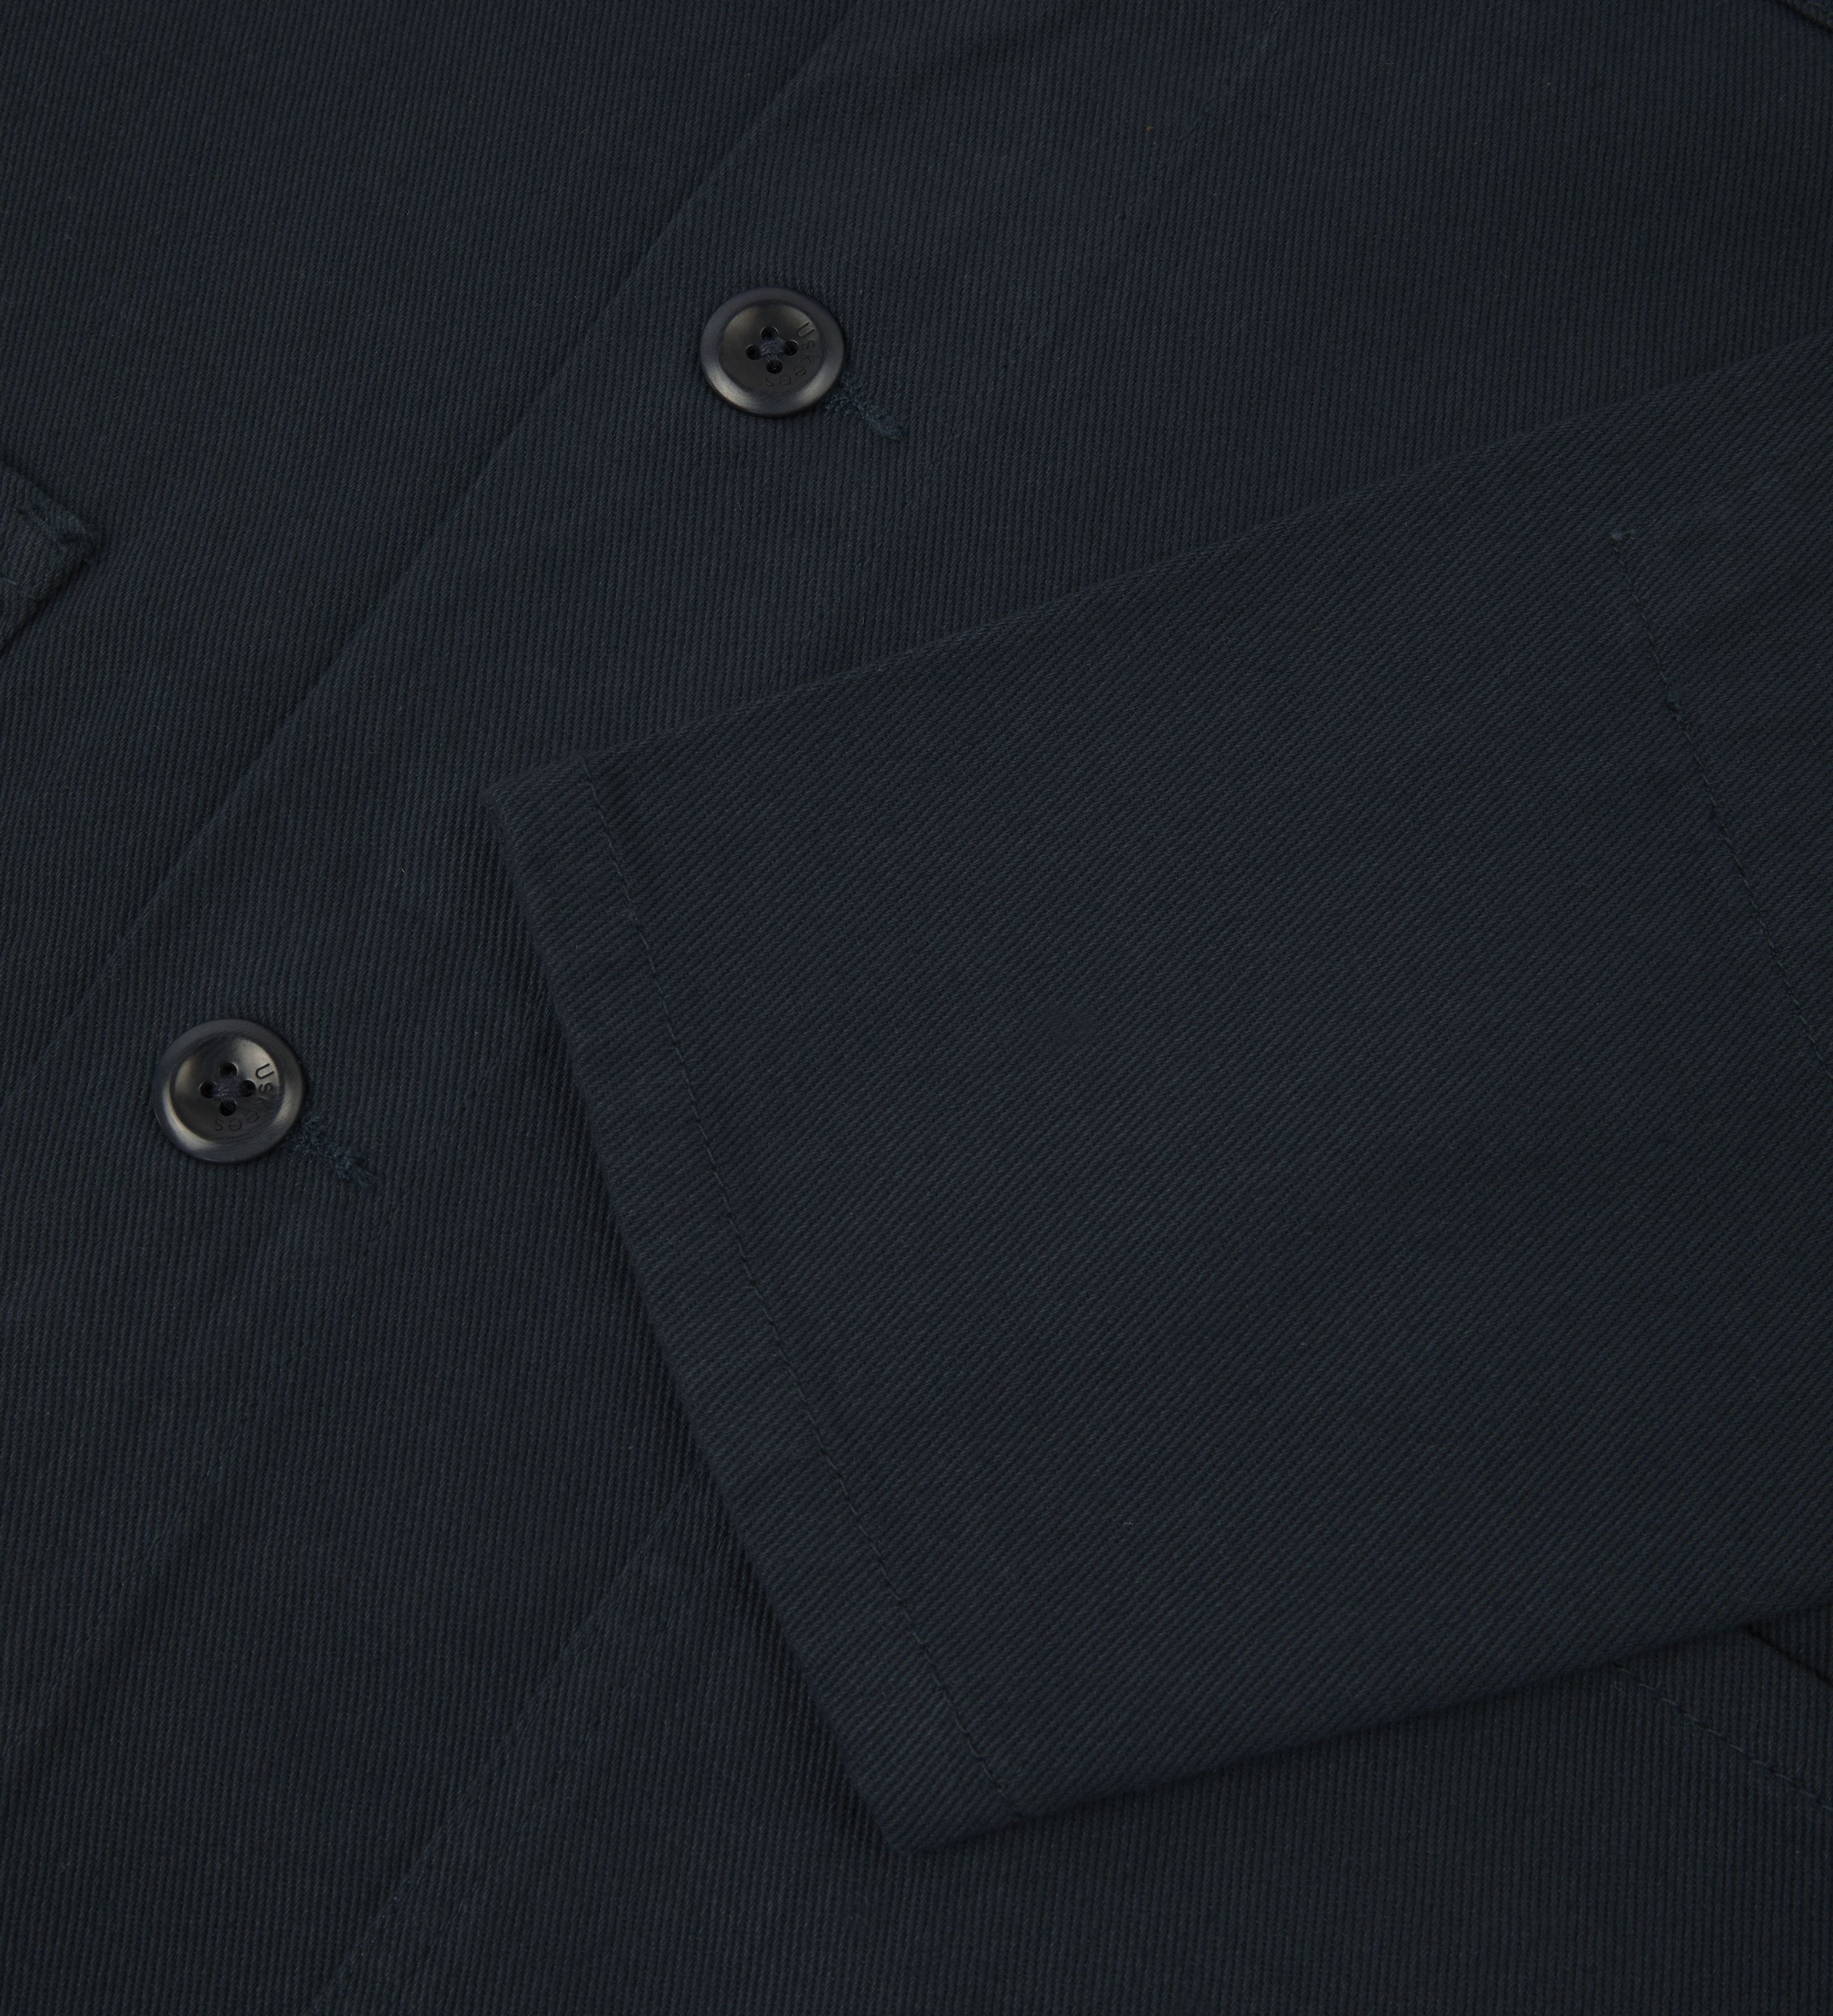 jacket from Uskees. Showing sleeve and blue corozo buttons.